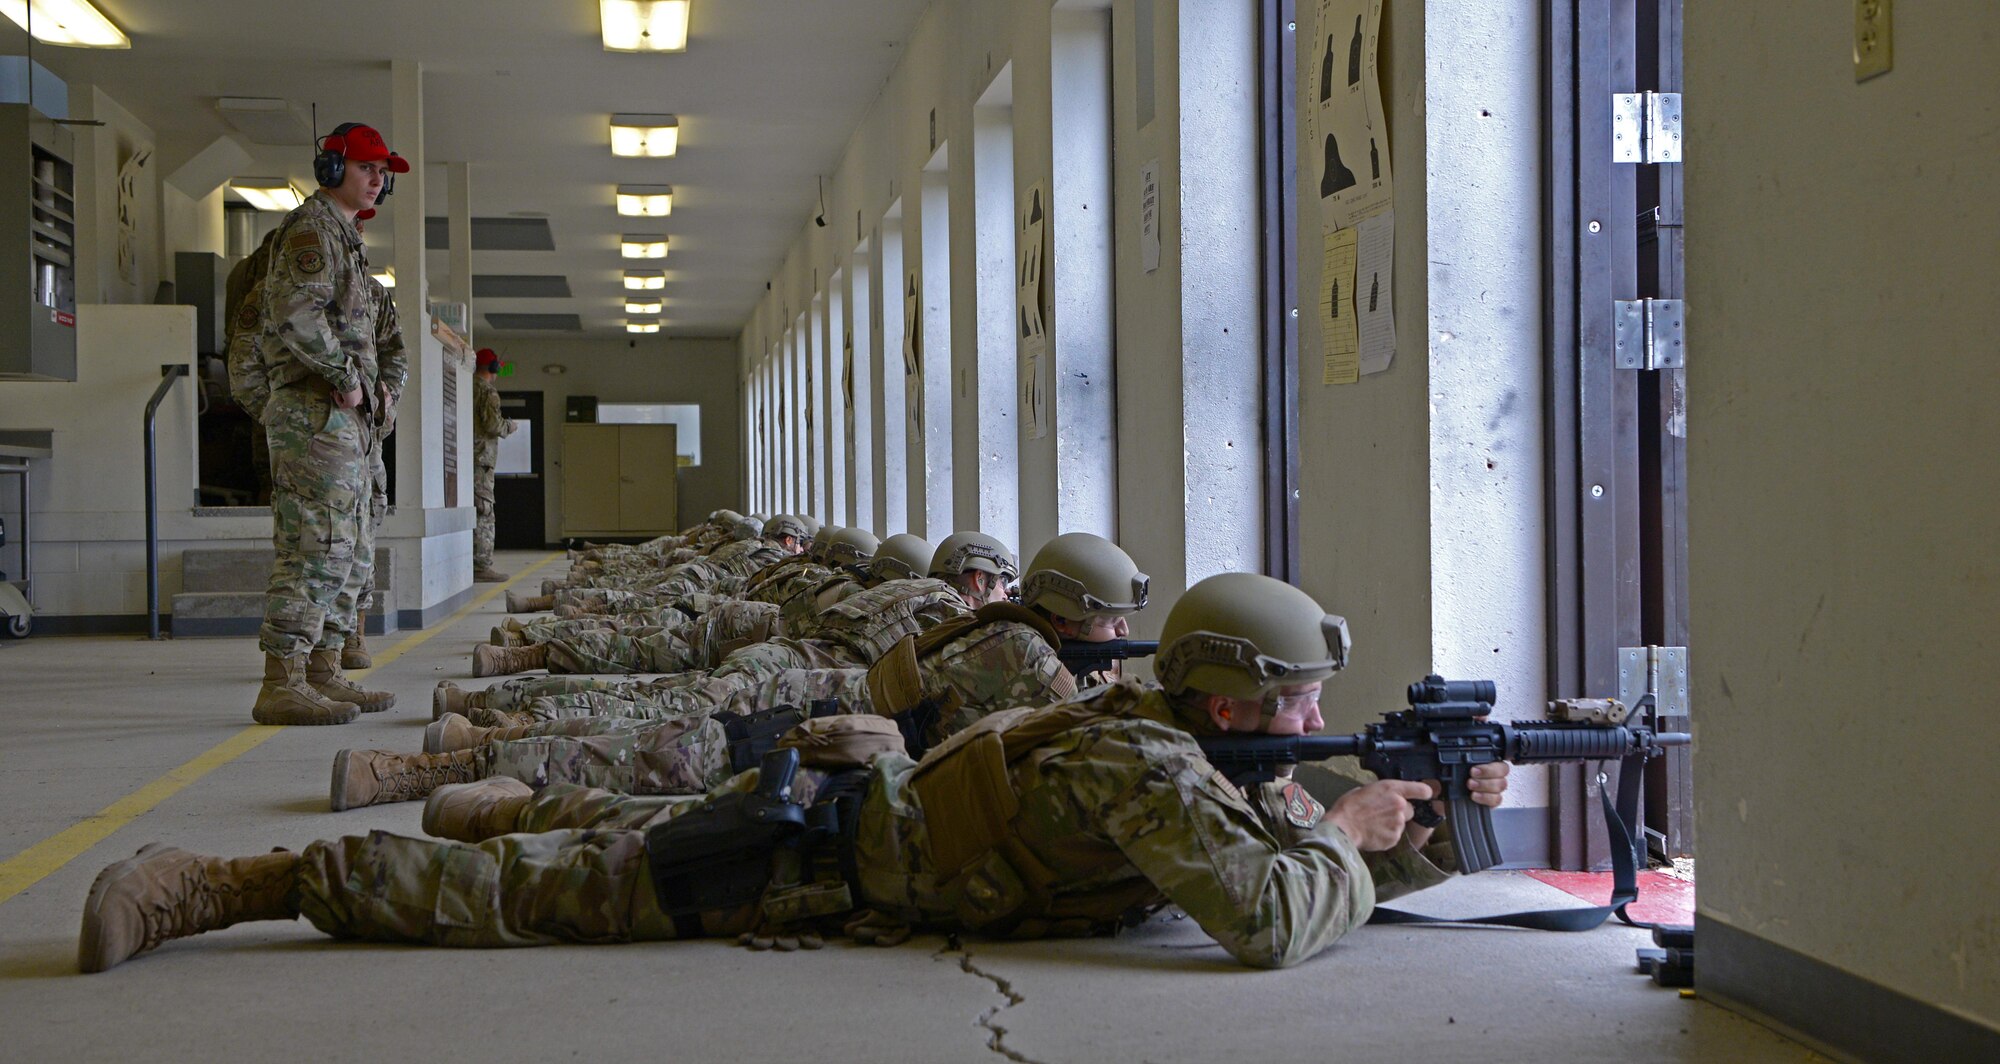 Airmen from the 354th Security Forces Squadron (SFS) fire M4 carbines during a new Security Forces Qualification Course on Eielson Air Force Base, Alaska, July 14, 2021. The 354th SFS Combat Arms instructors have been tasked with training this new course to Defenders on Eielson. (U.S. Air Force photo by Senior Airman Beaux Hebert)